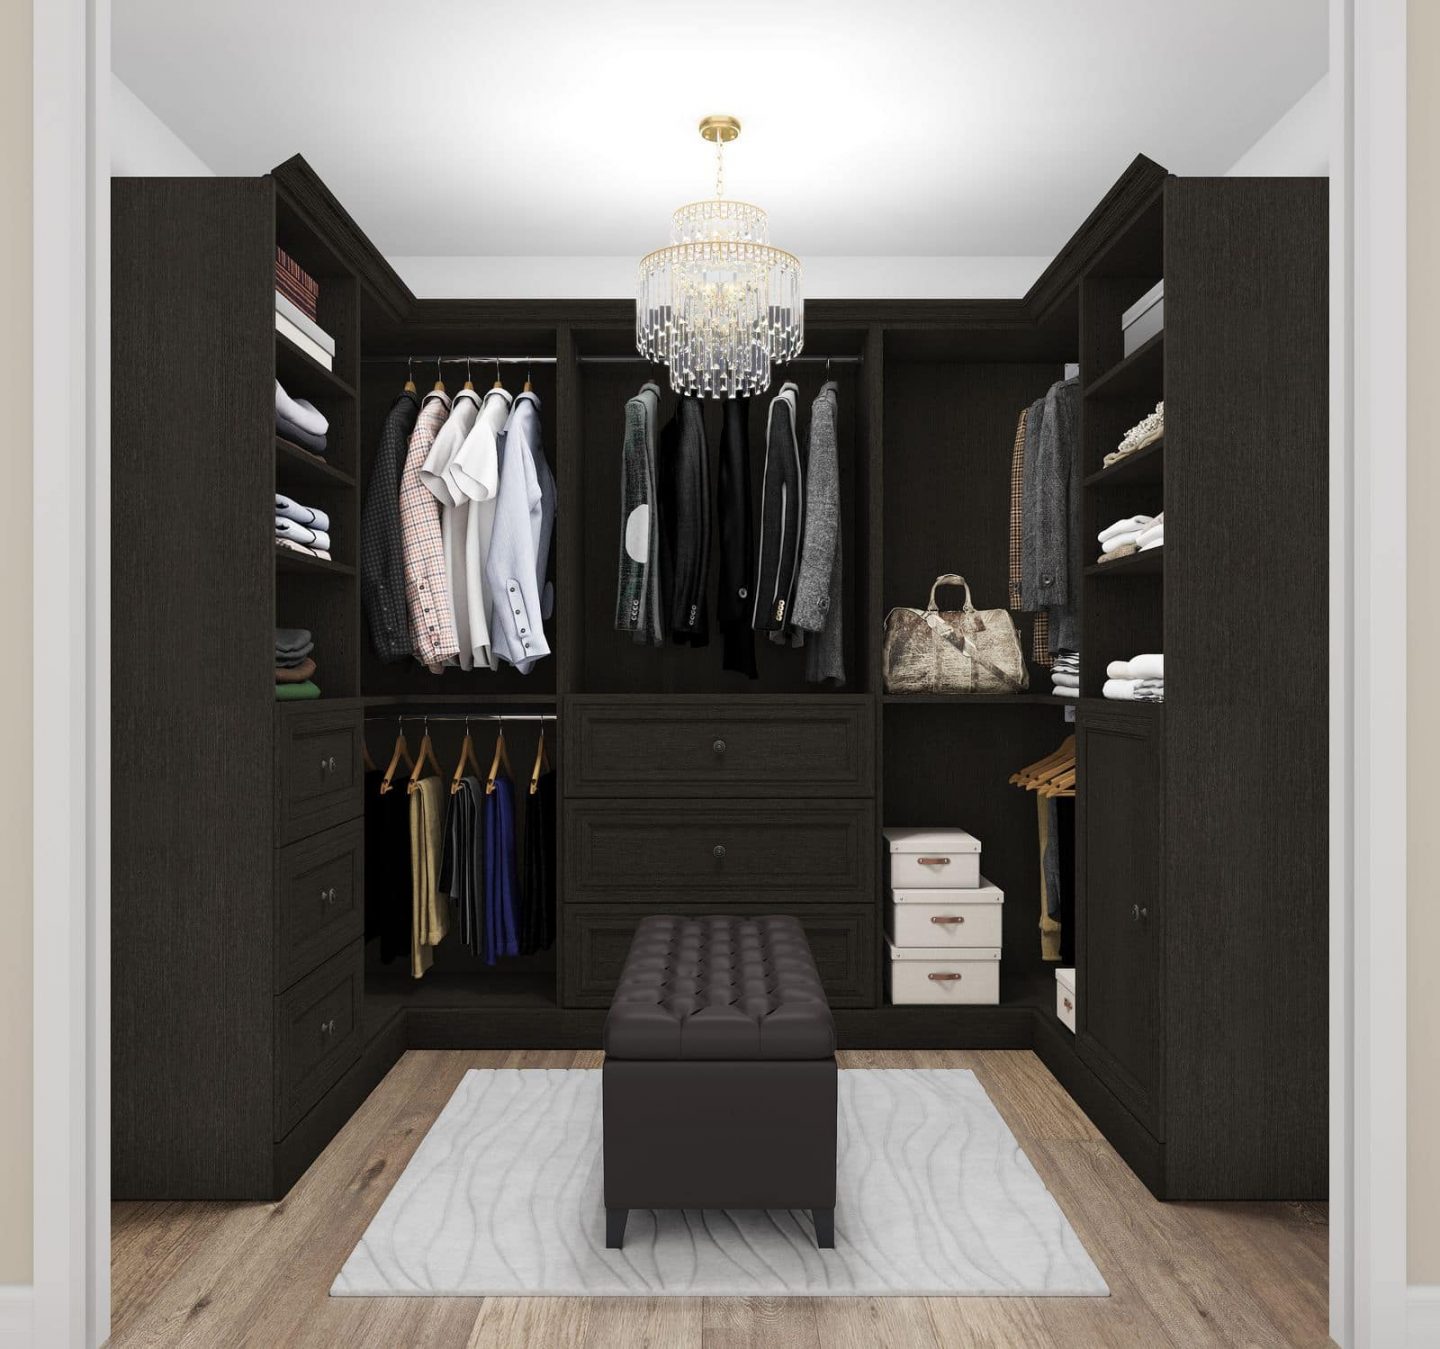 You Can Set Up a Walk-In Closet on a Budget! - Bestar